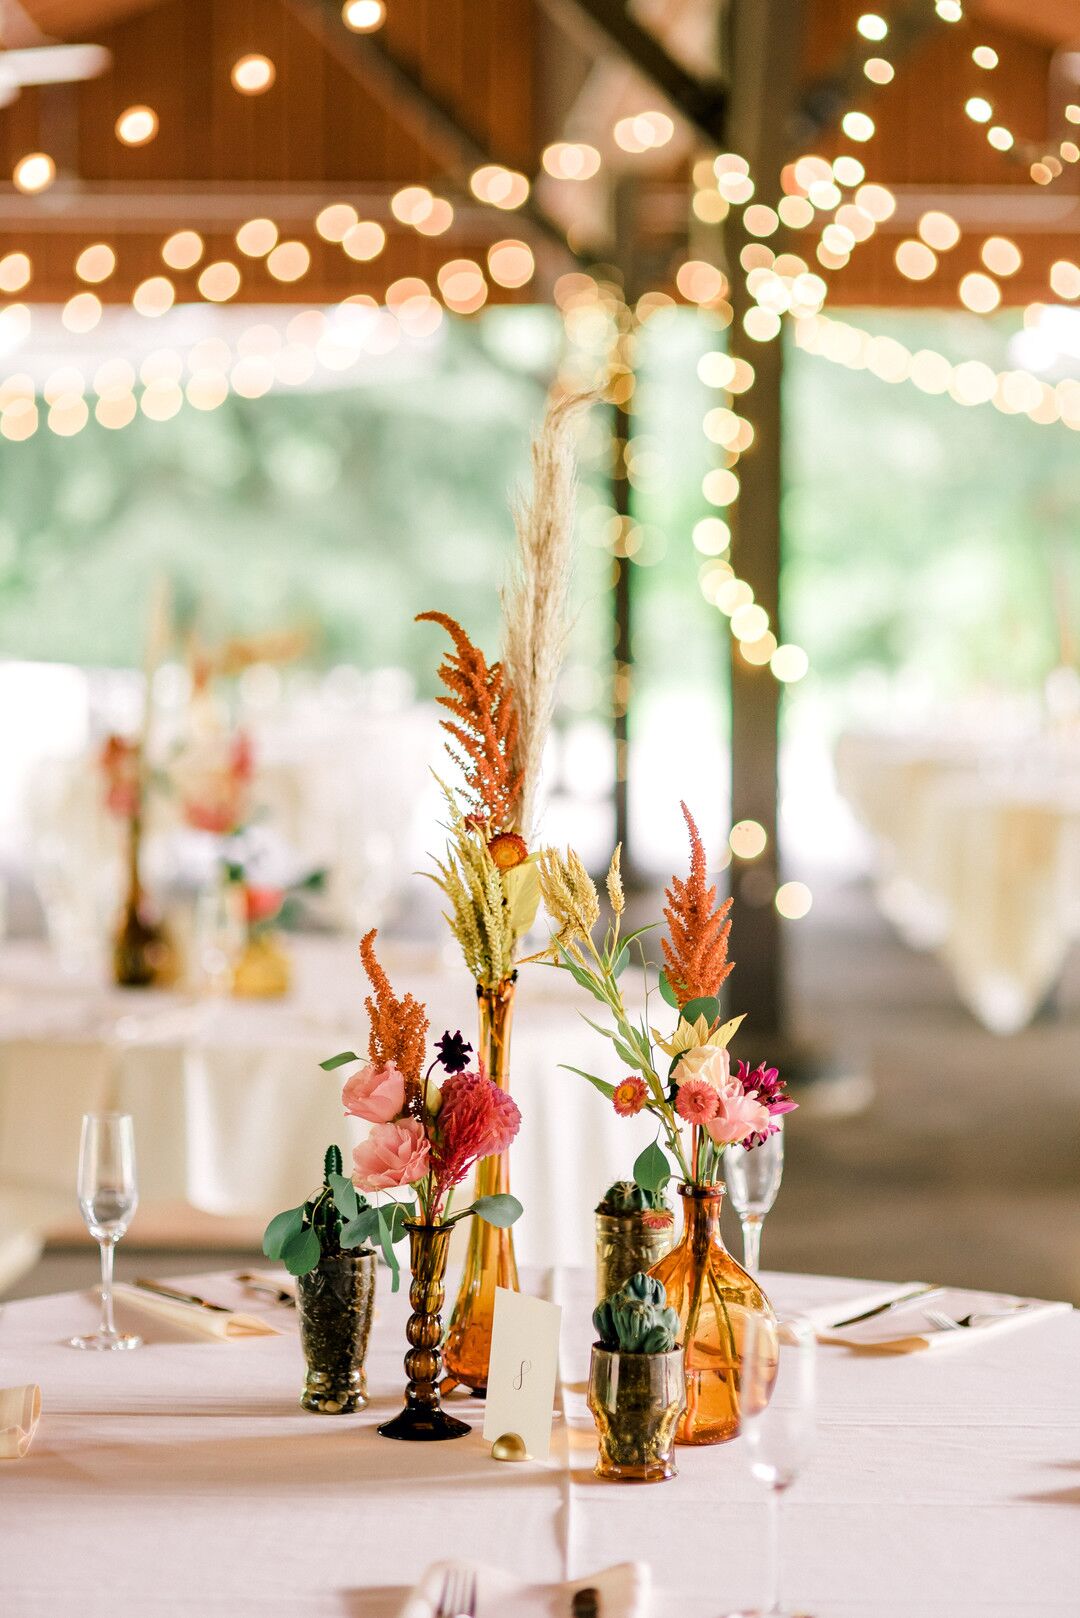 Small Eclectic Centerpieces with Mismatched Vases